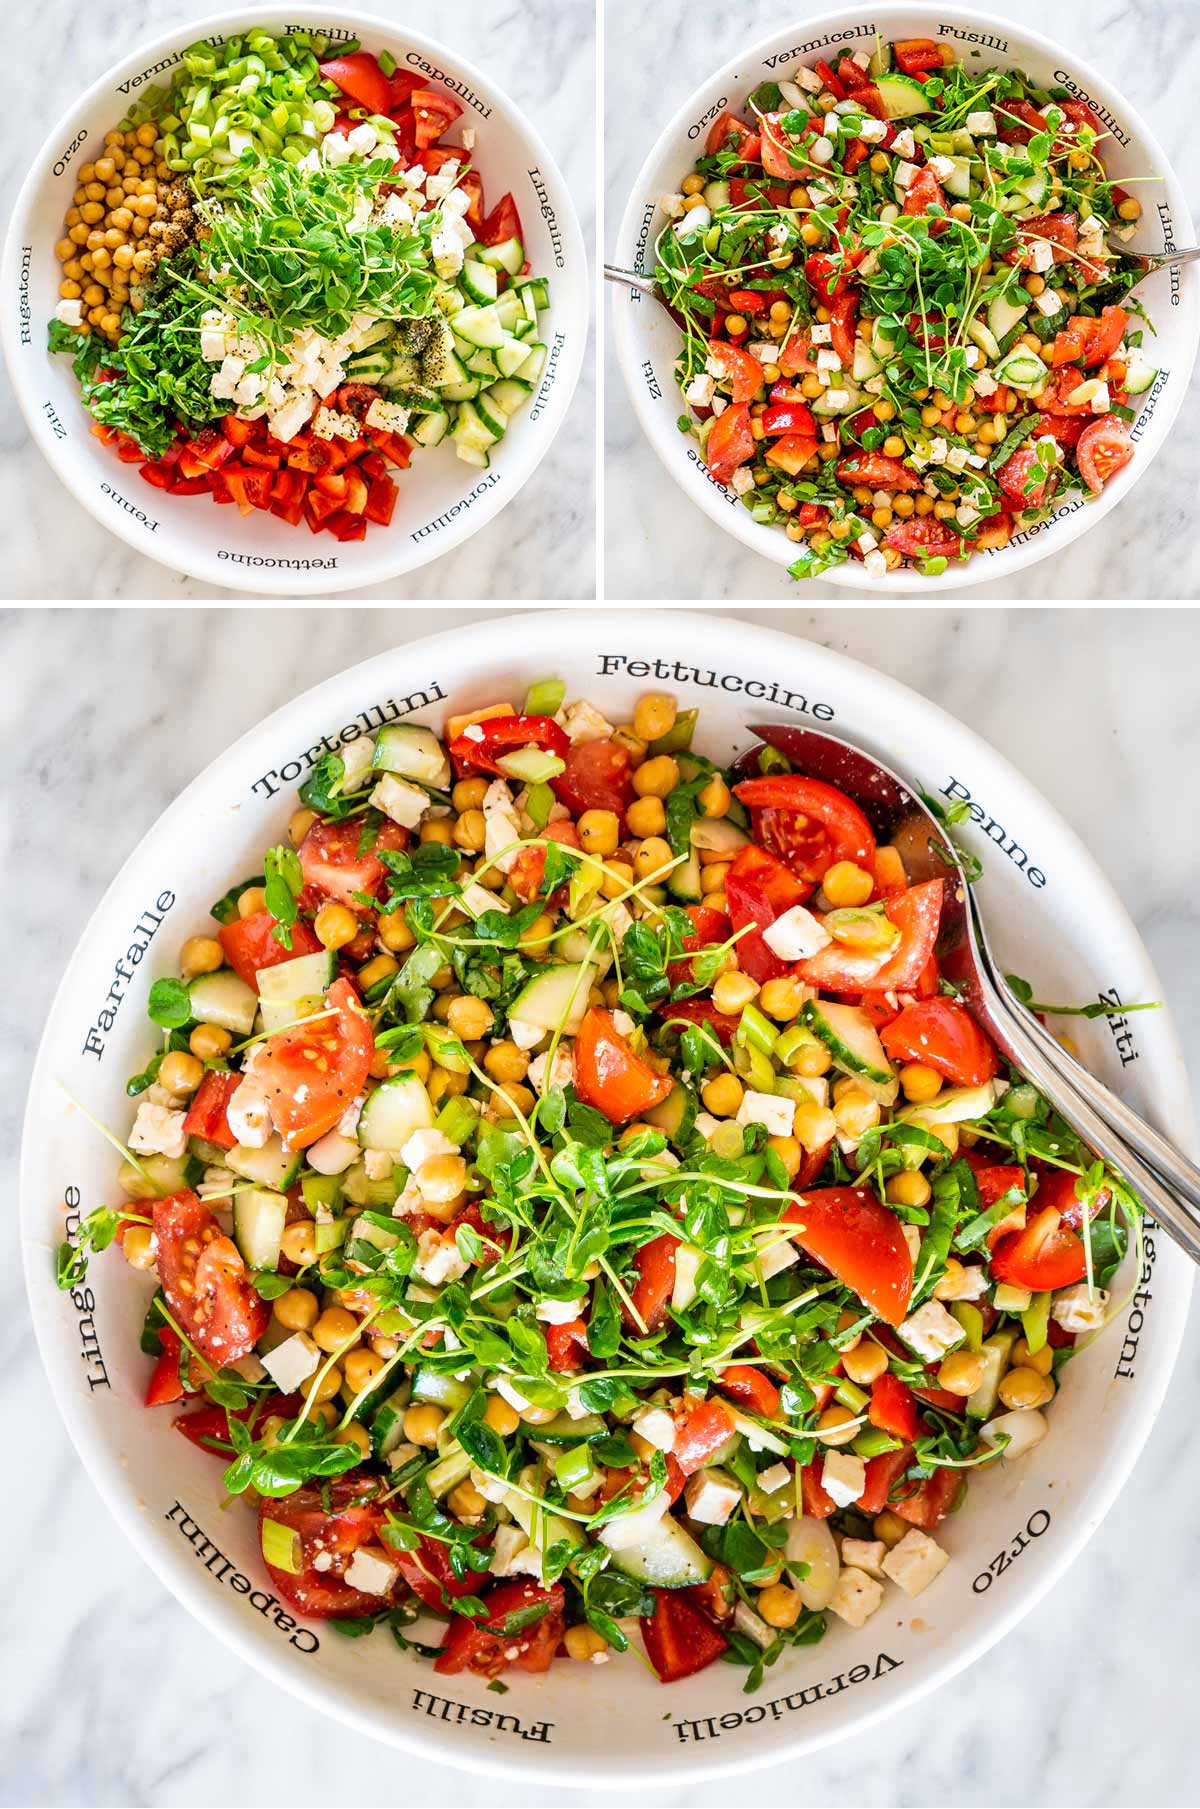 process shots showing how to make chickpea salad